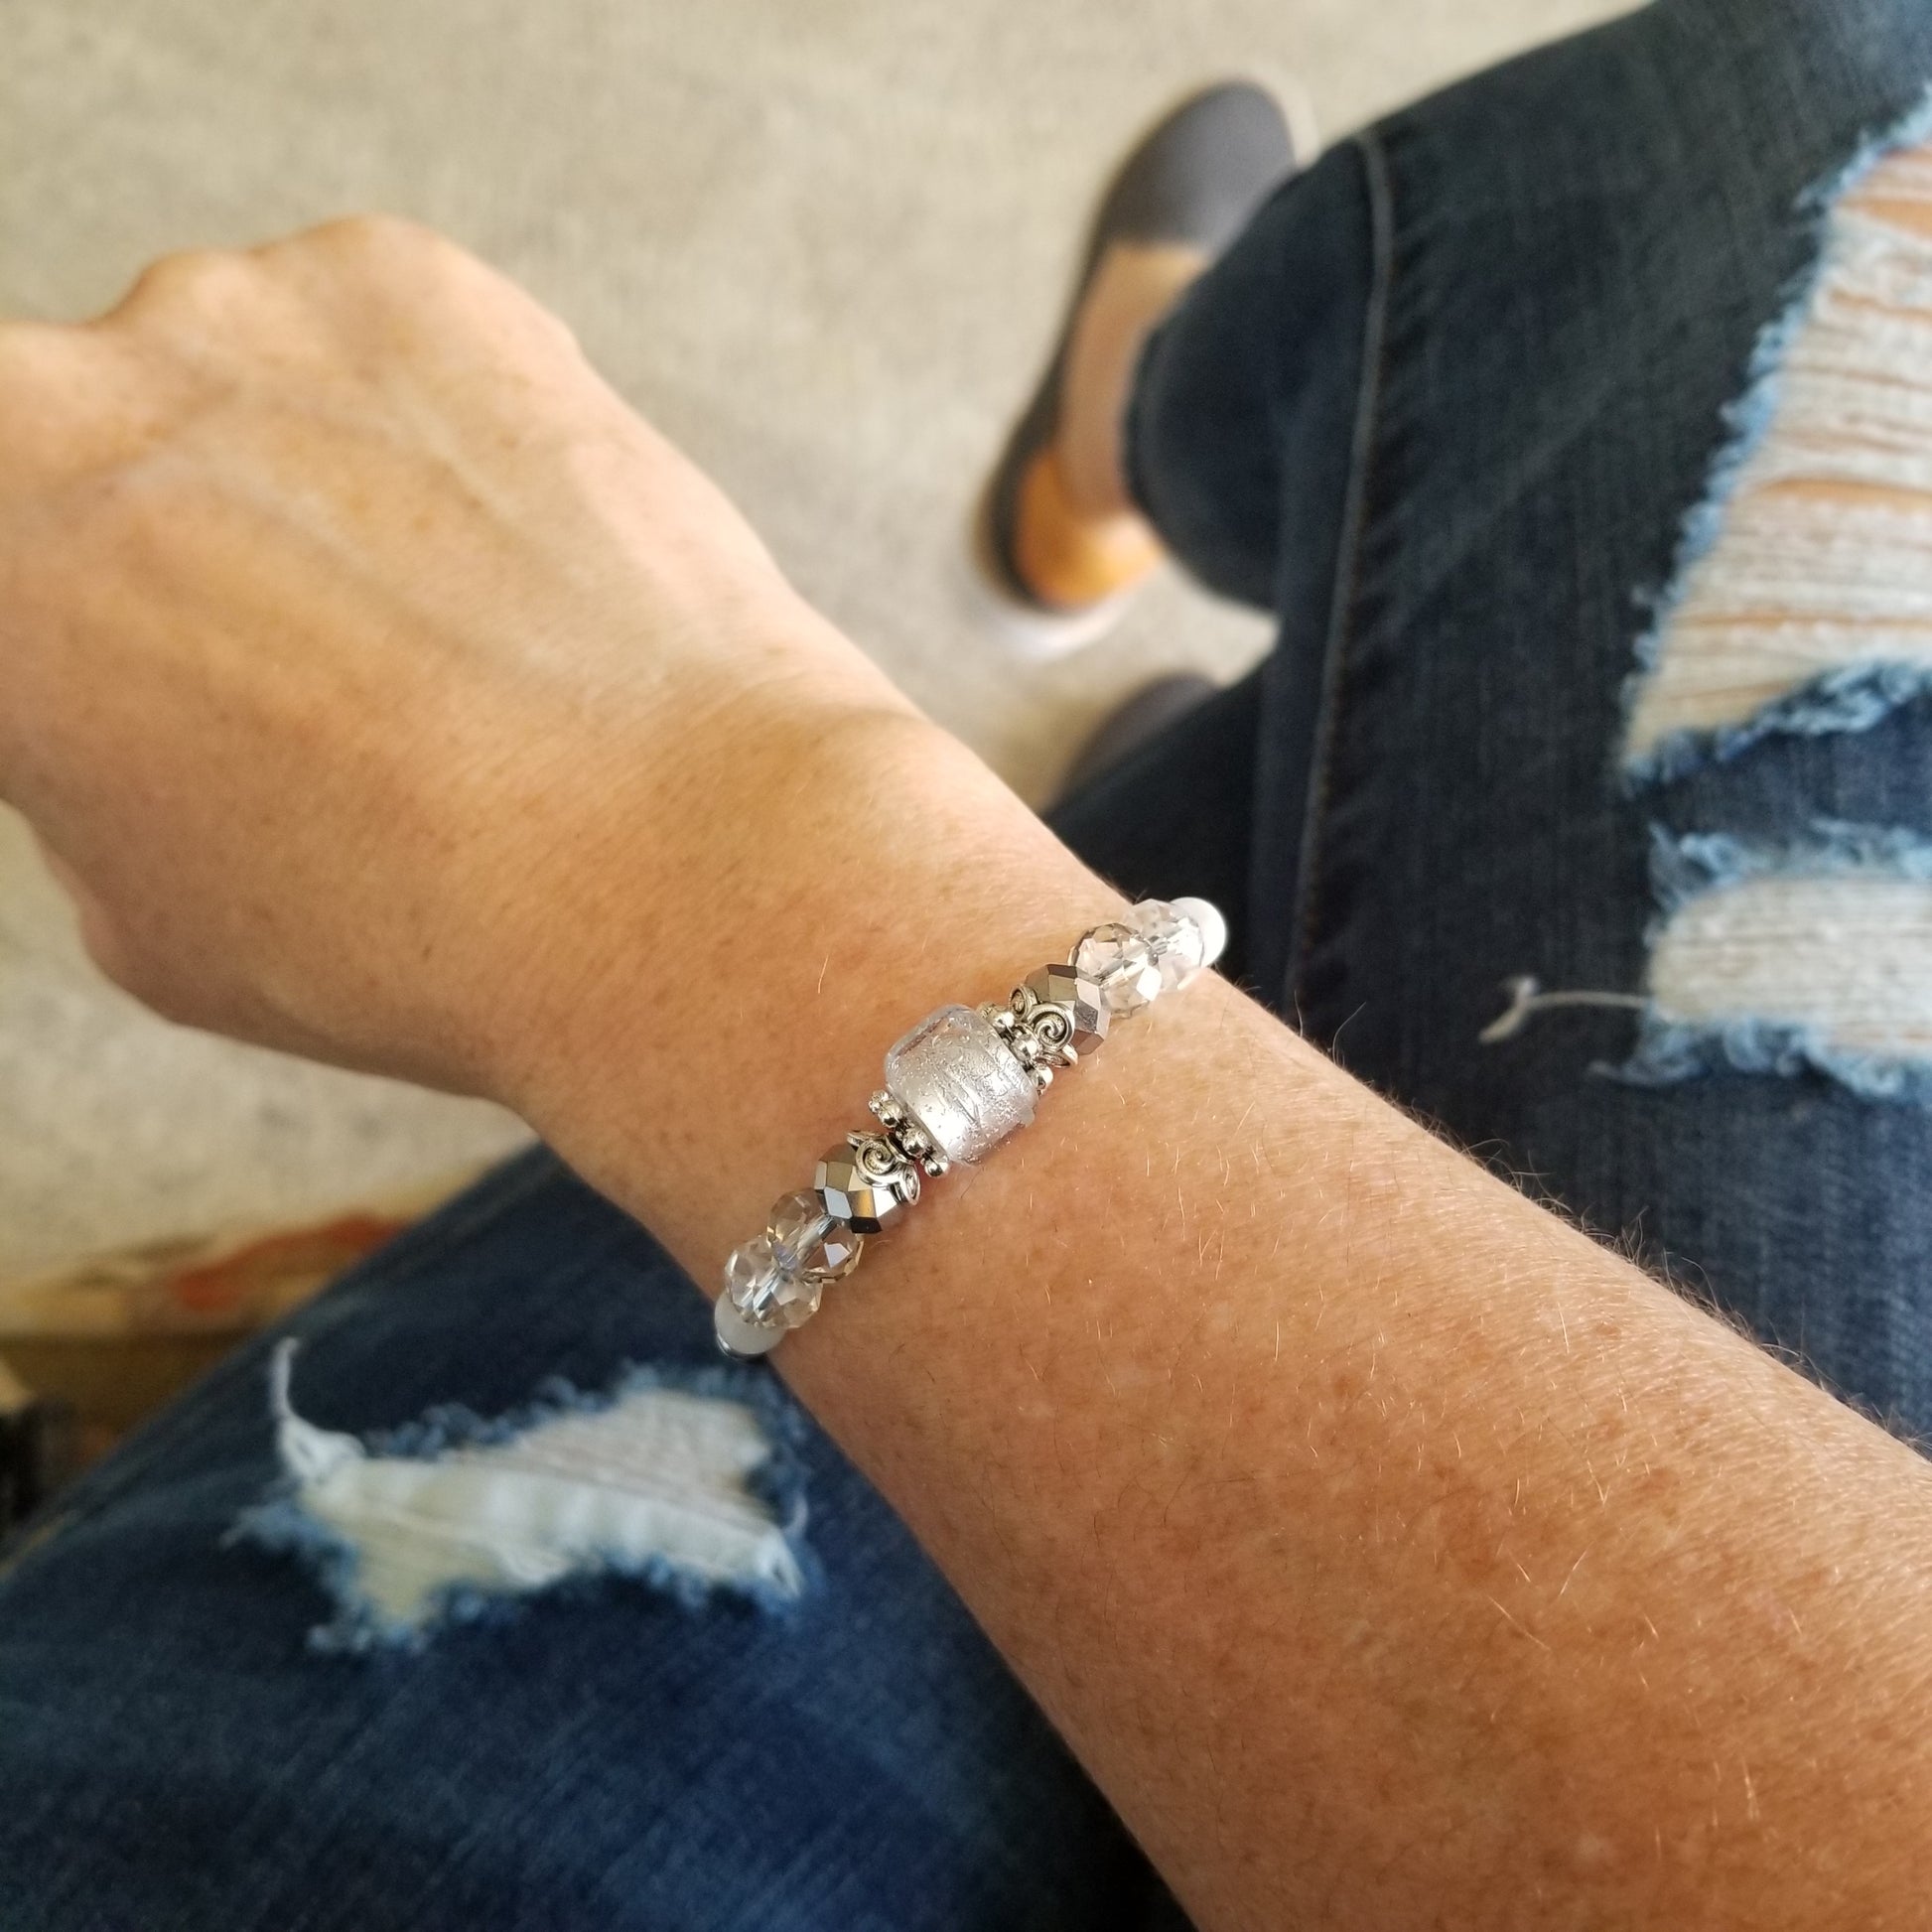 clear foil glass bead with coordinating glass beads wrap bracelet on wrist